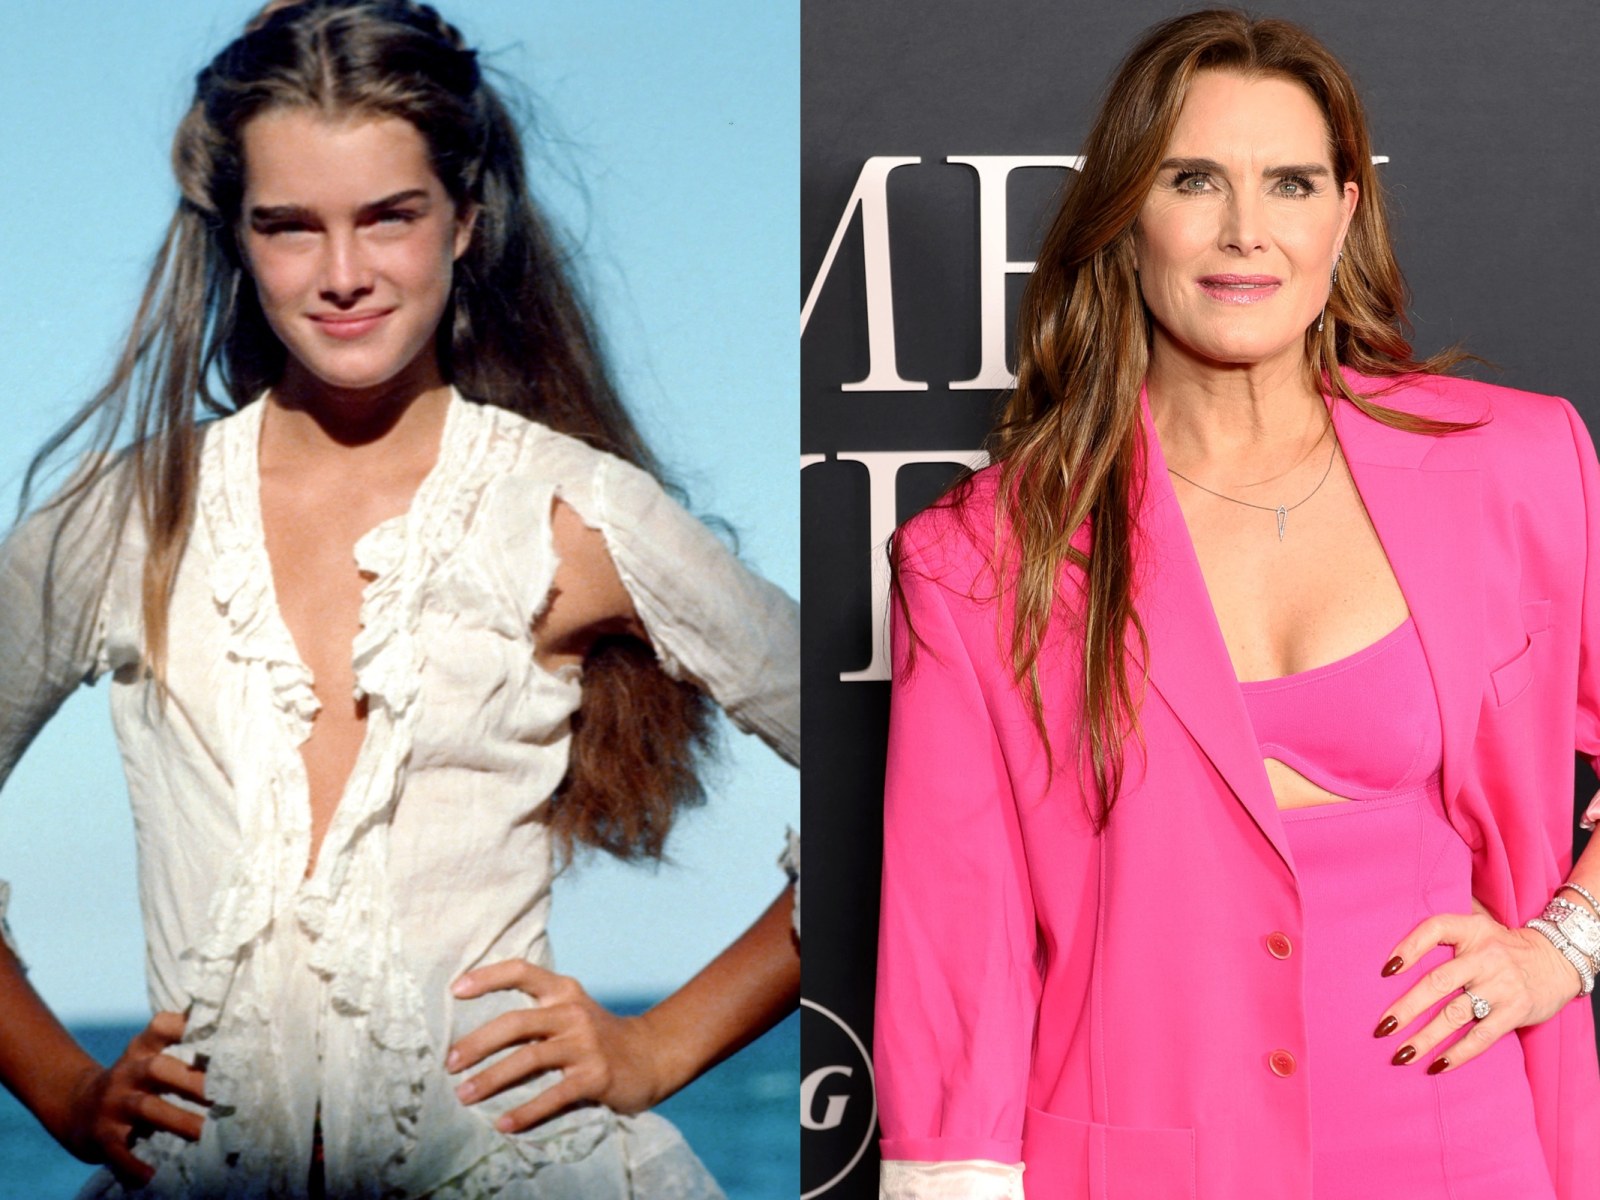 Naturist Nudist Clips - Brooke Shields' Sexualization as a Child Was Staggering